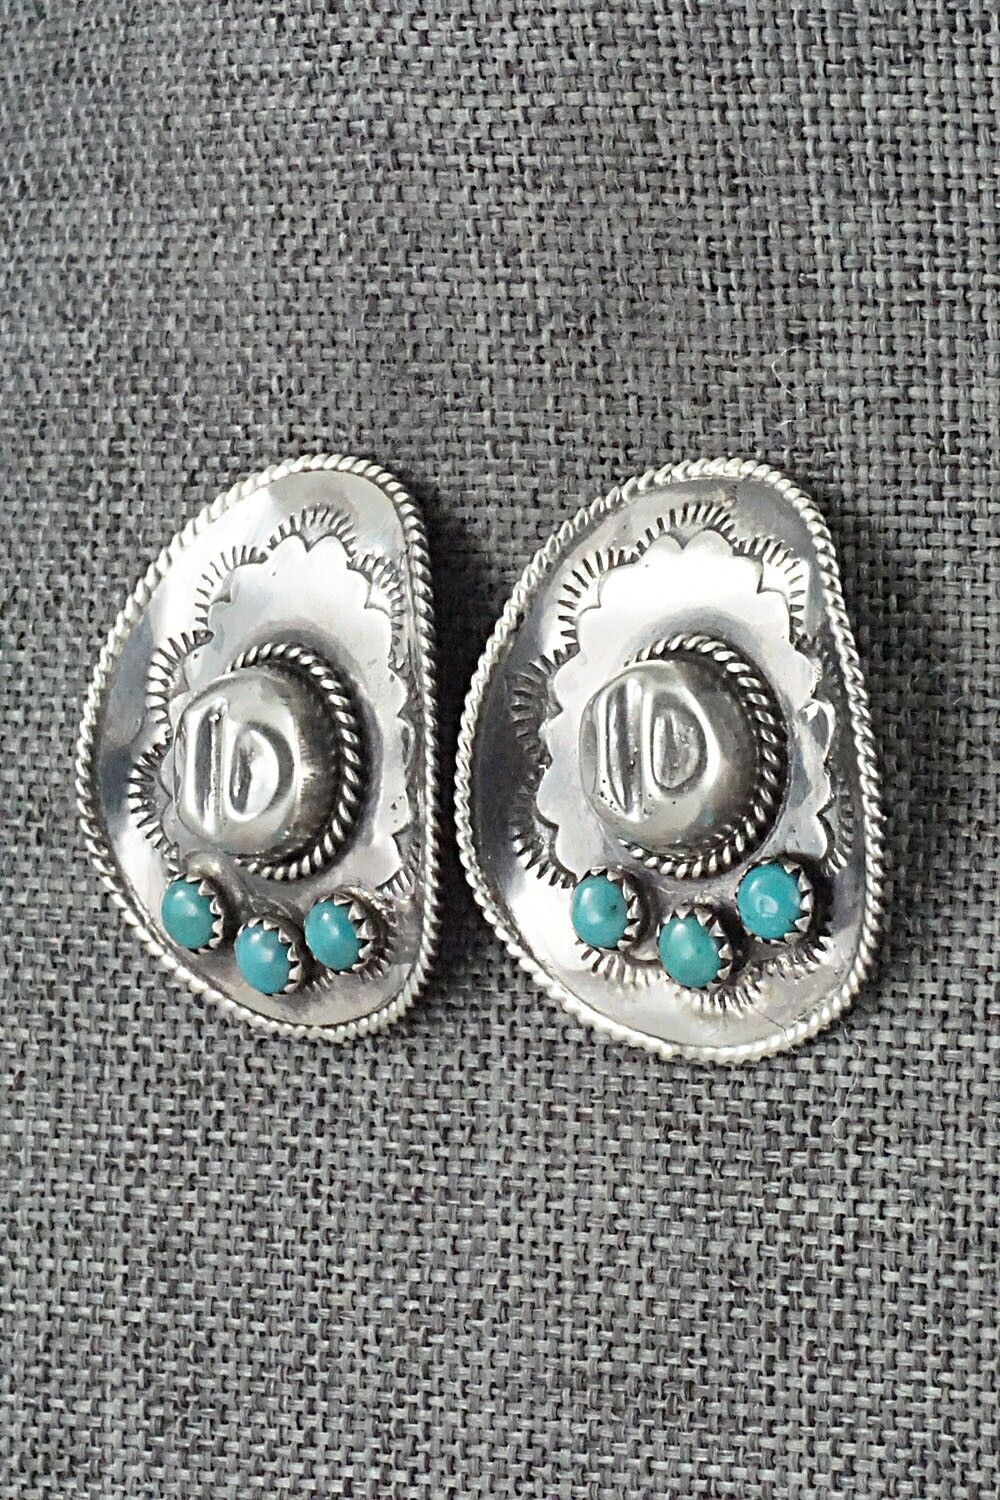 Turquoise & Sterling Silver Earrings - Bobby Platero